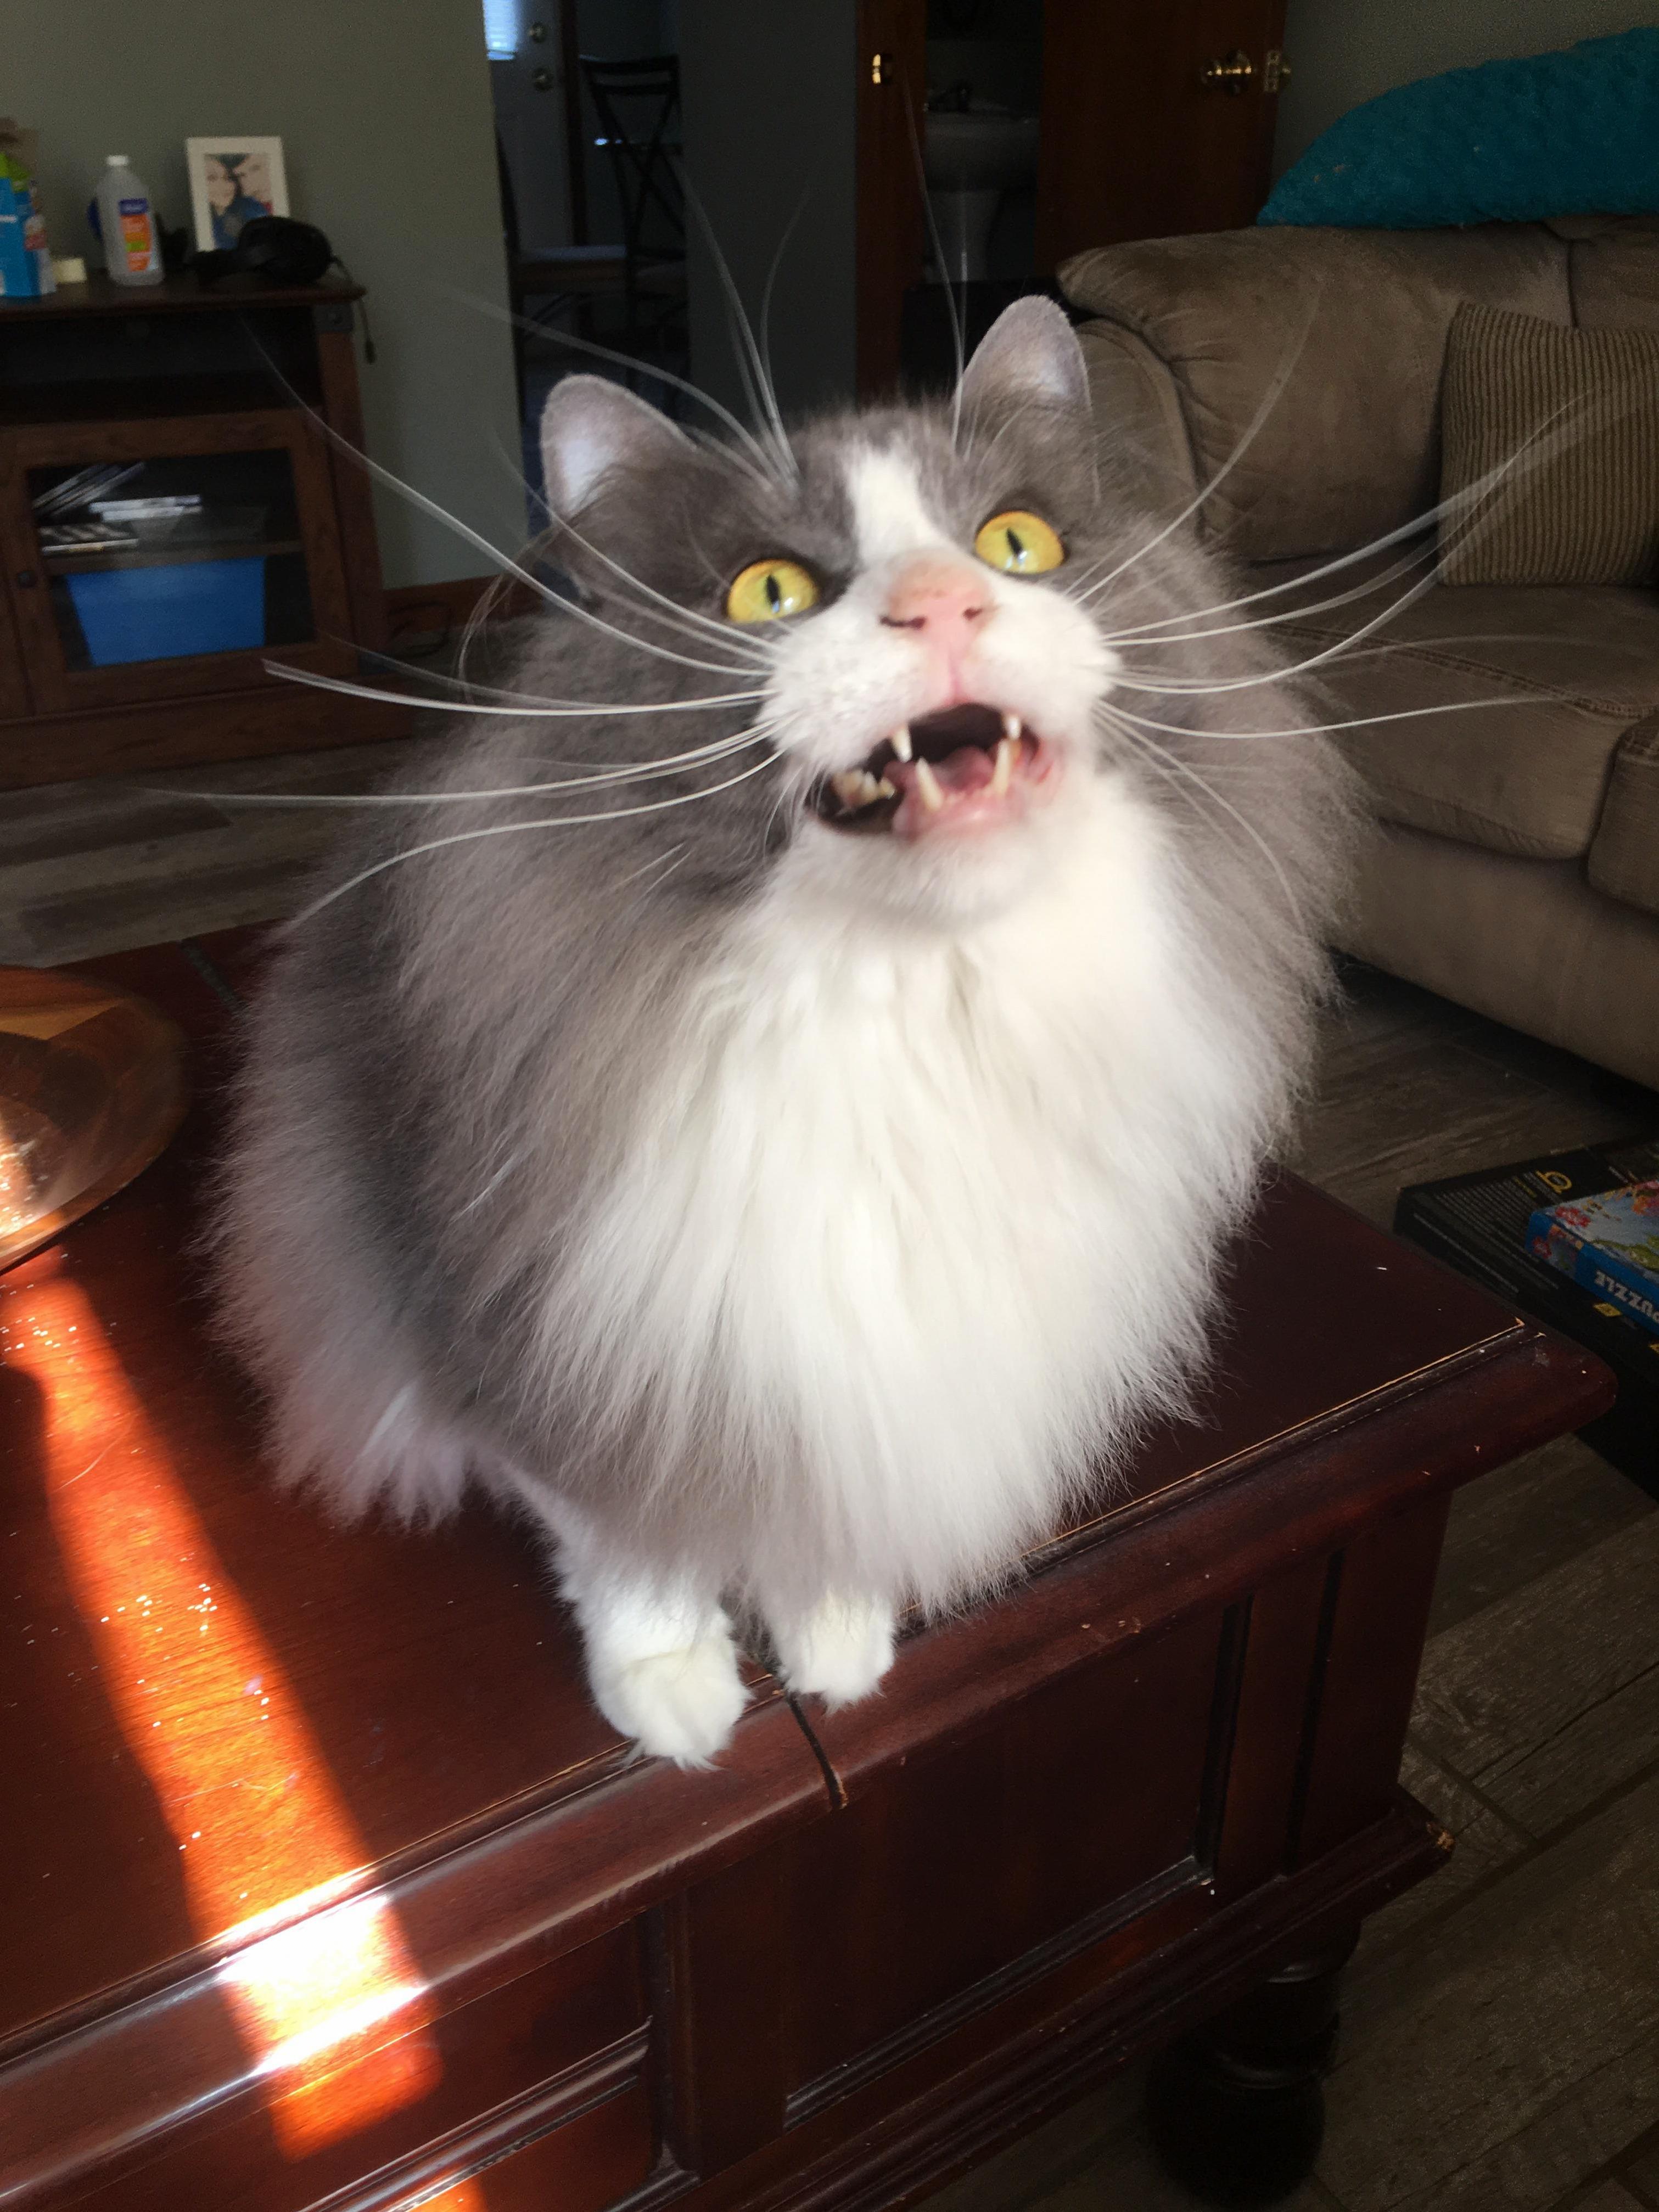 My ferocious maine coon letting out his battle roar